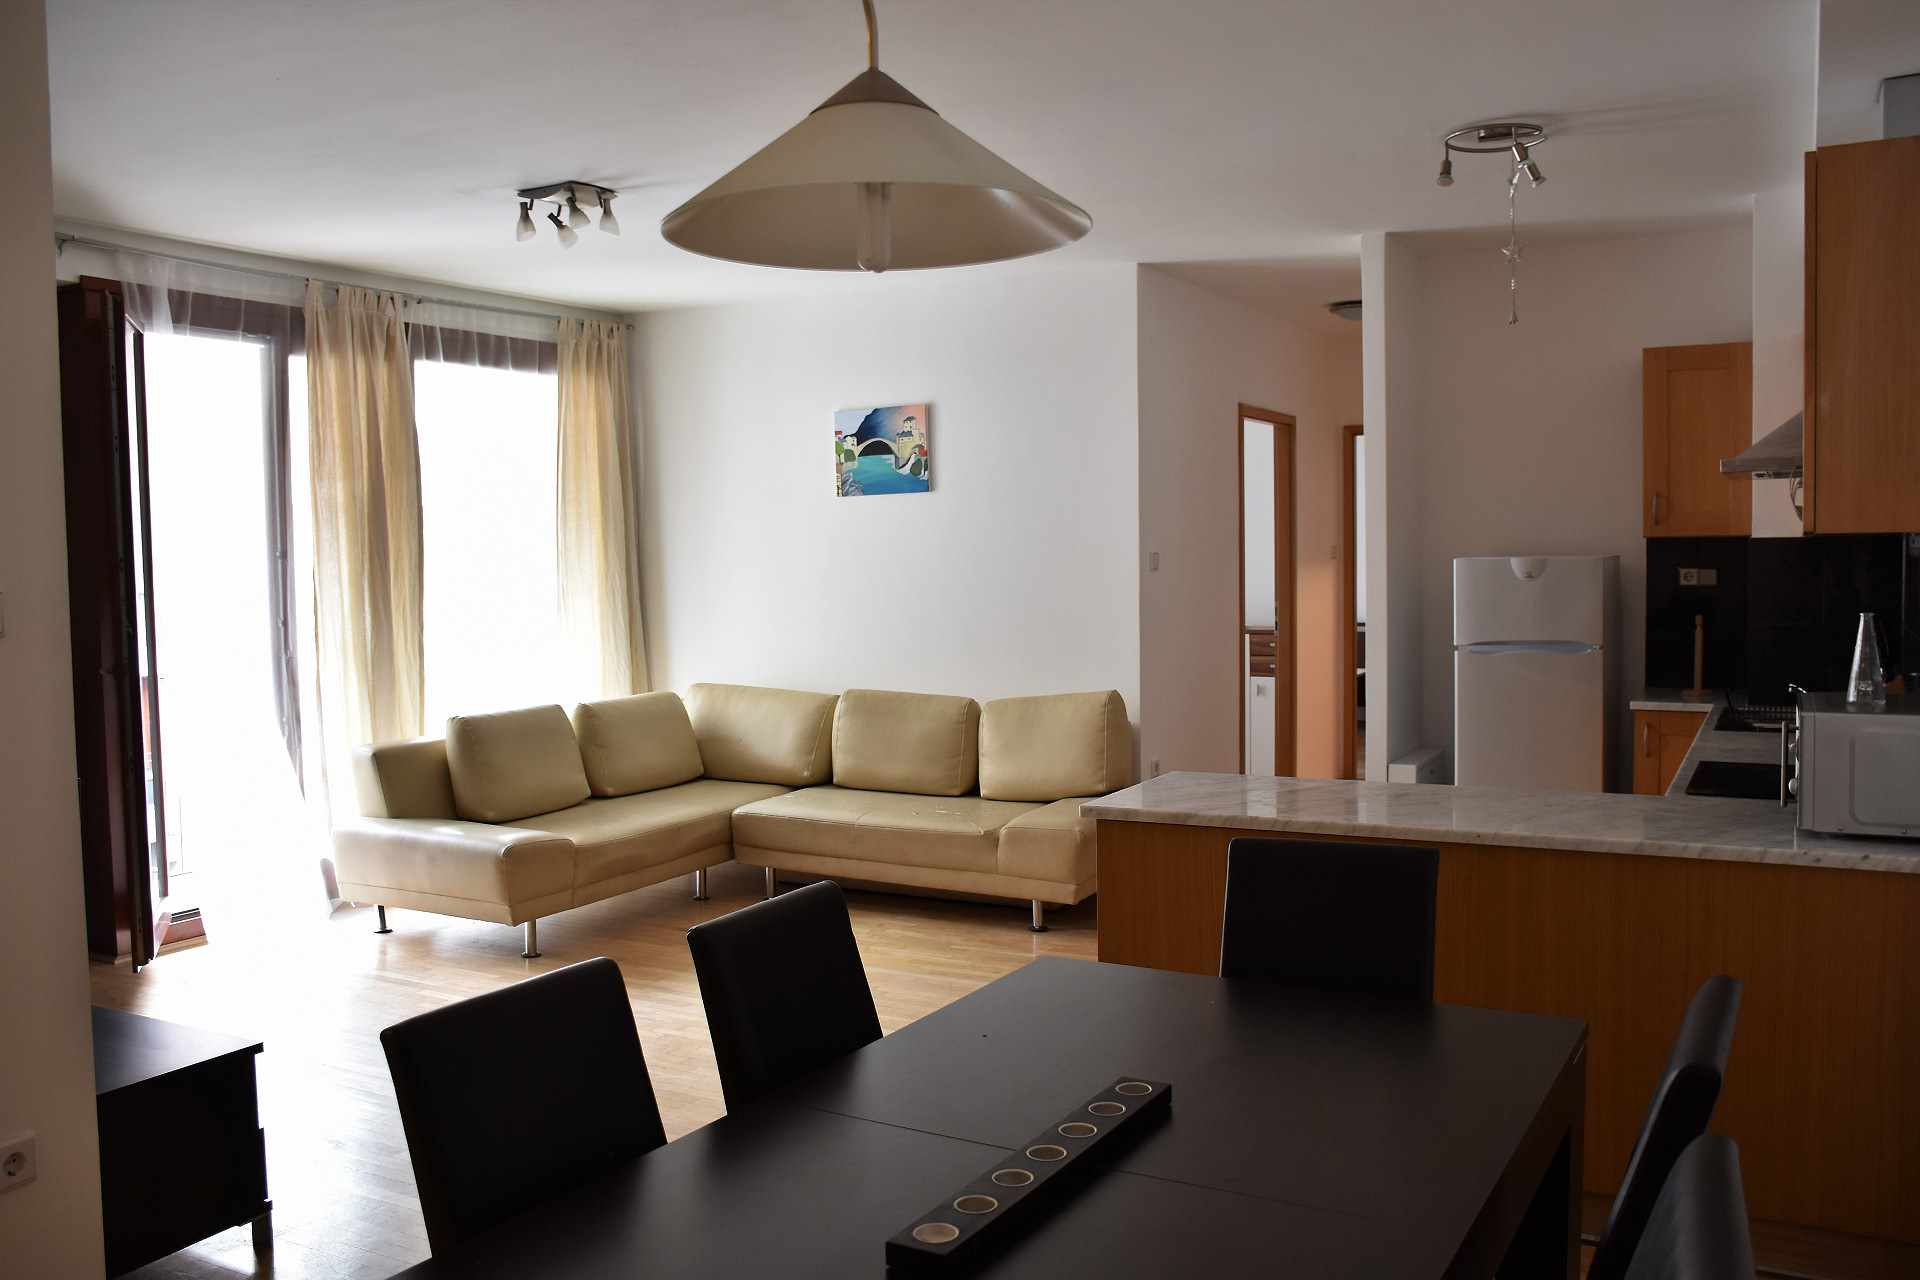 budapestrental-cheap-budget-2-bedroom-apartment-for-rent-includes-parking-garage-newly-built1